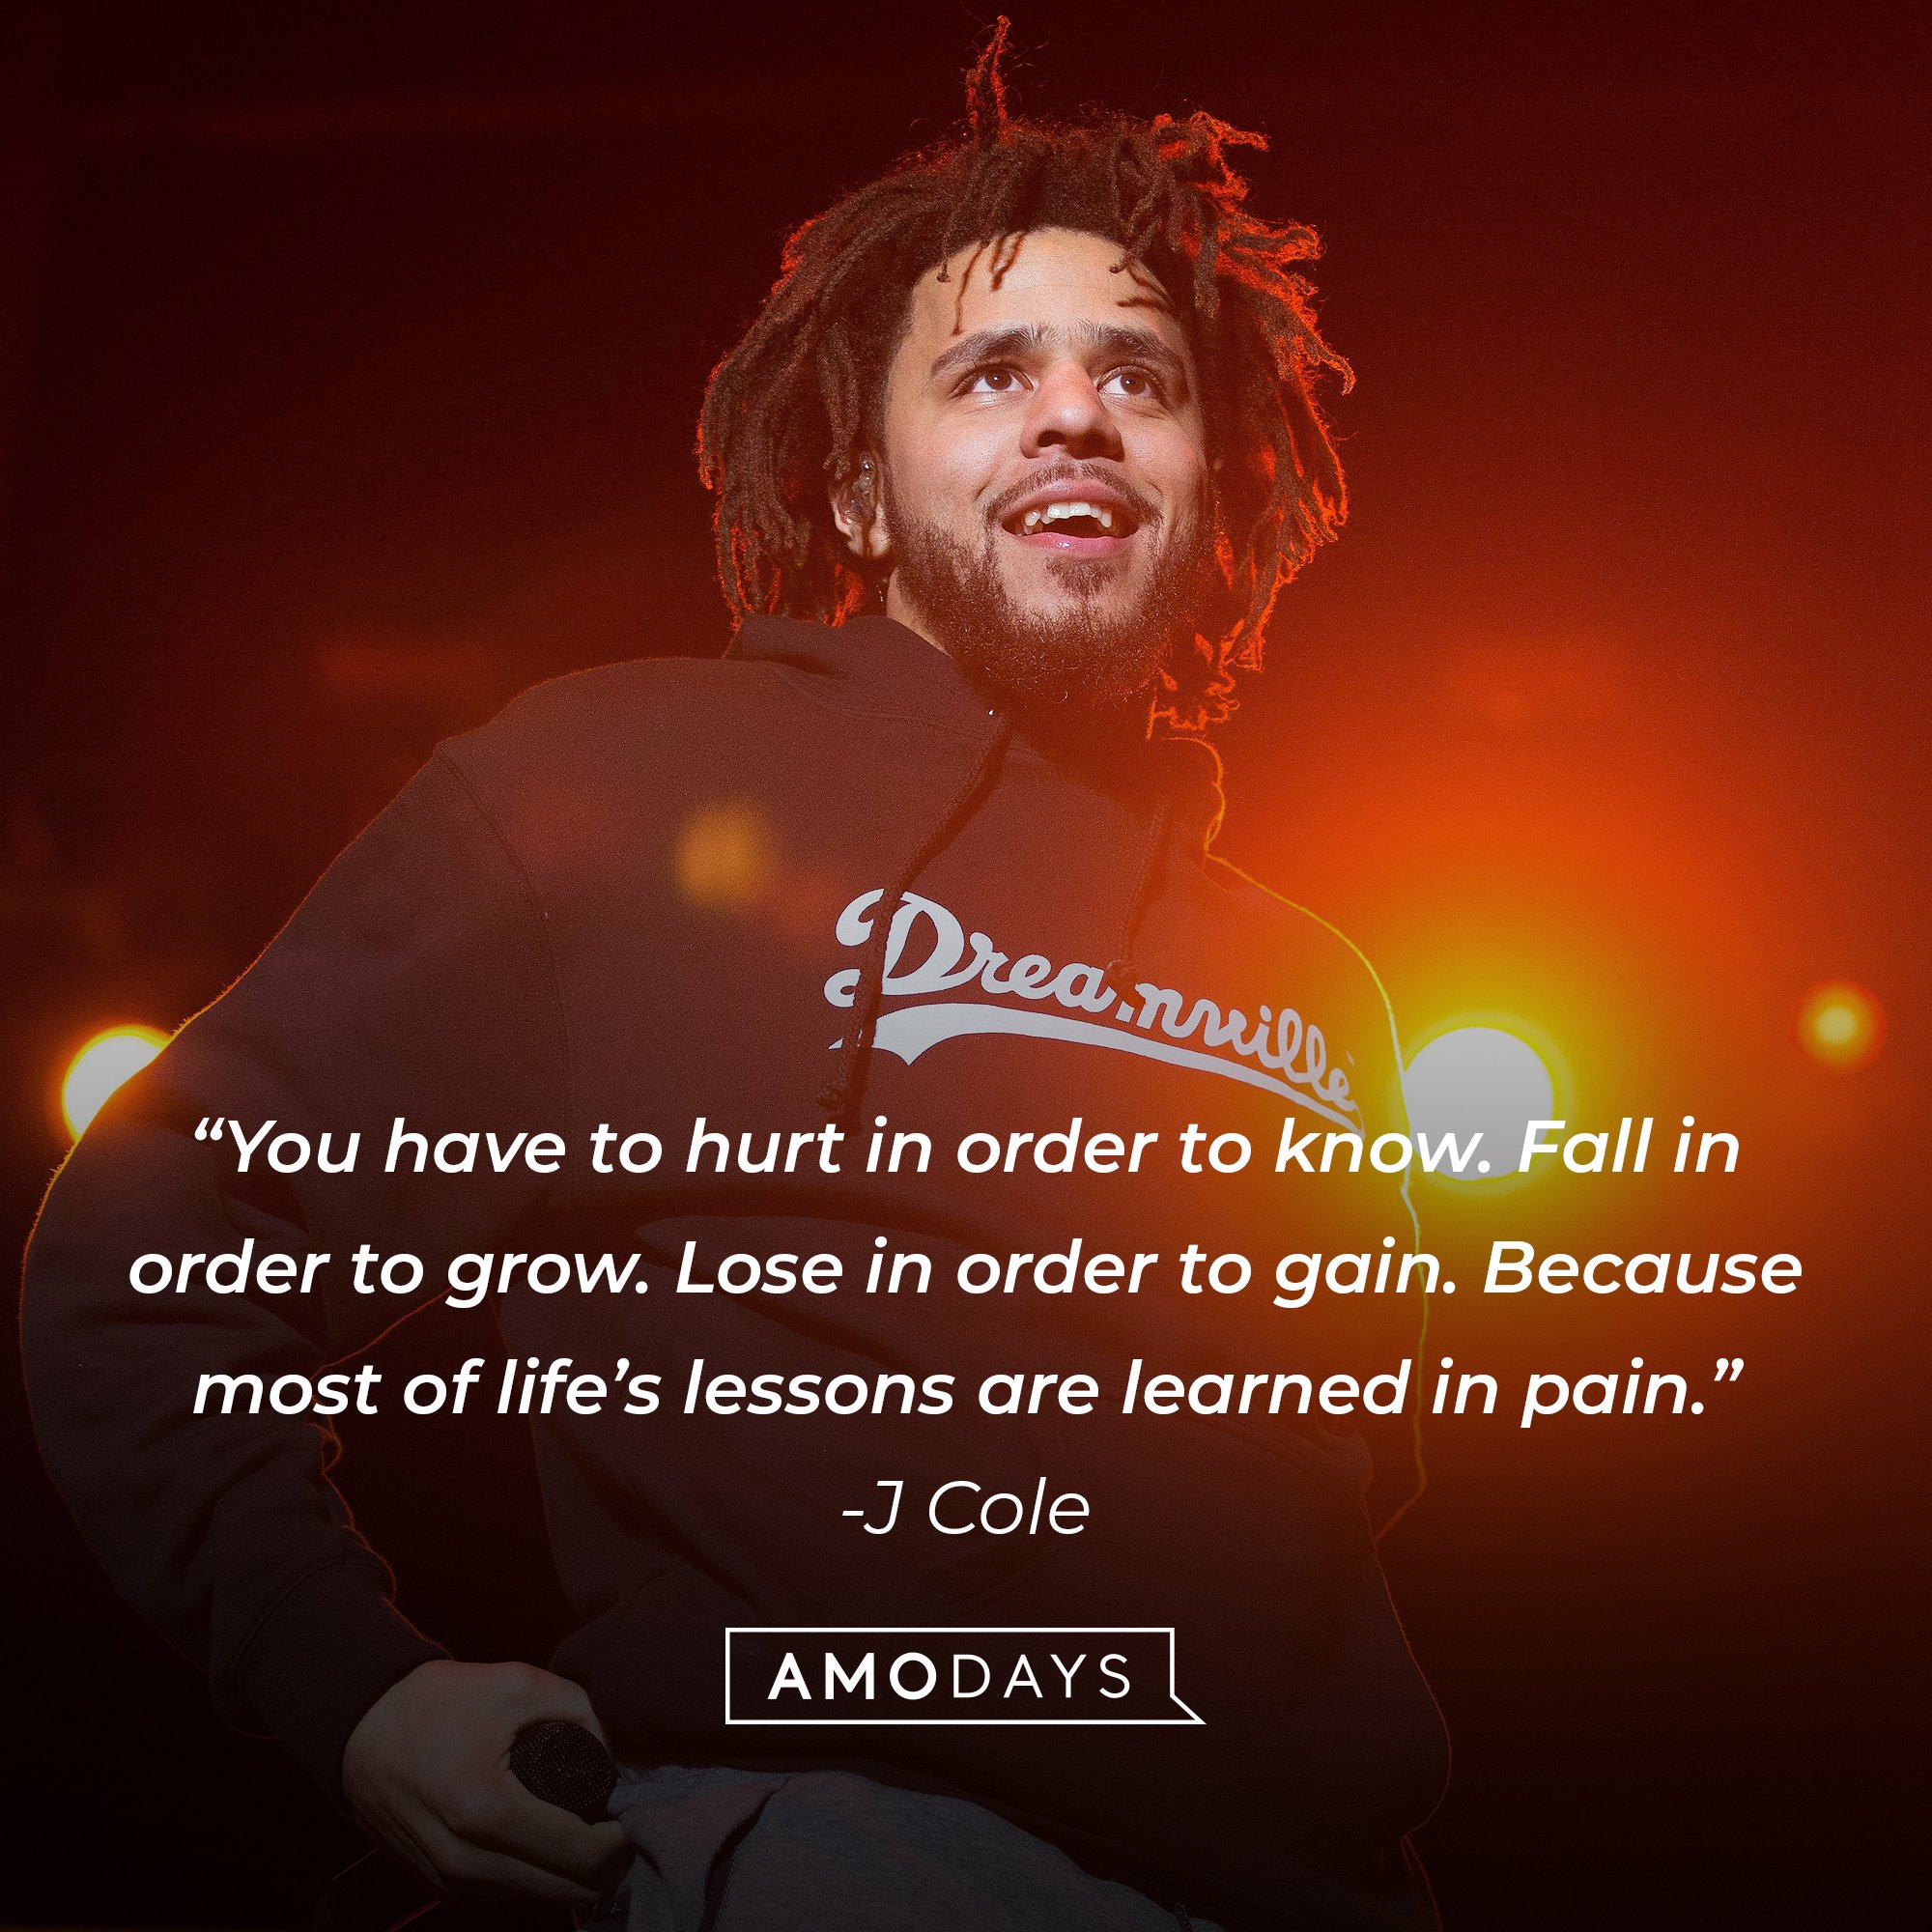 J Cole's quote: “You have to hurt in order to know. Fall in order to grow. Lose in order to gain. Because most of life’s lessons are learned in pain.” | Image: AmoDays